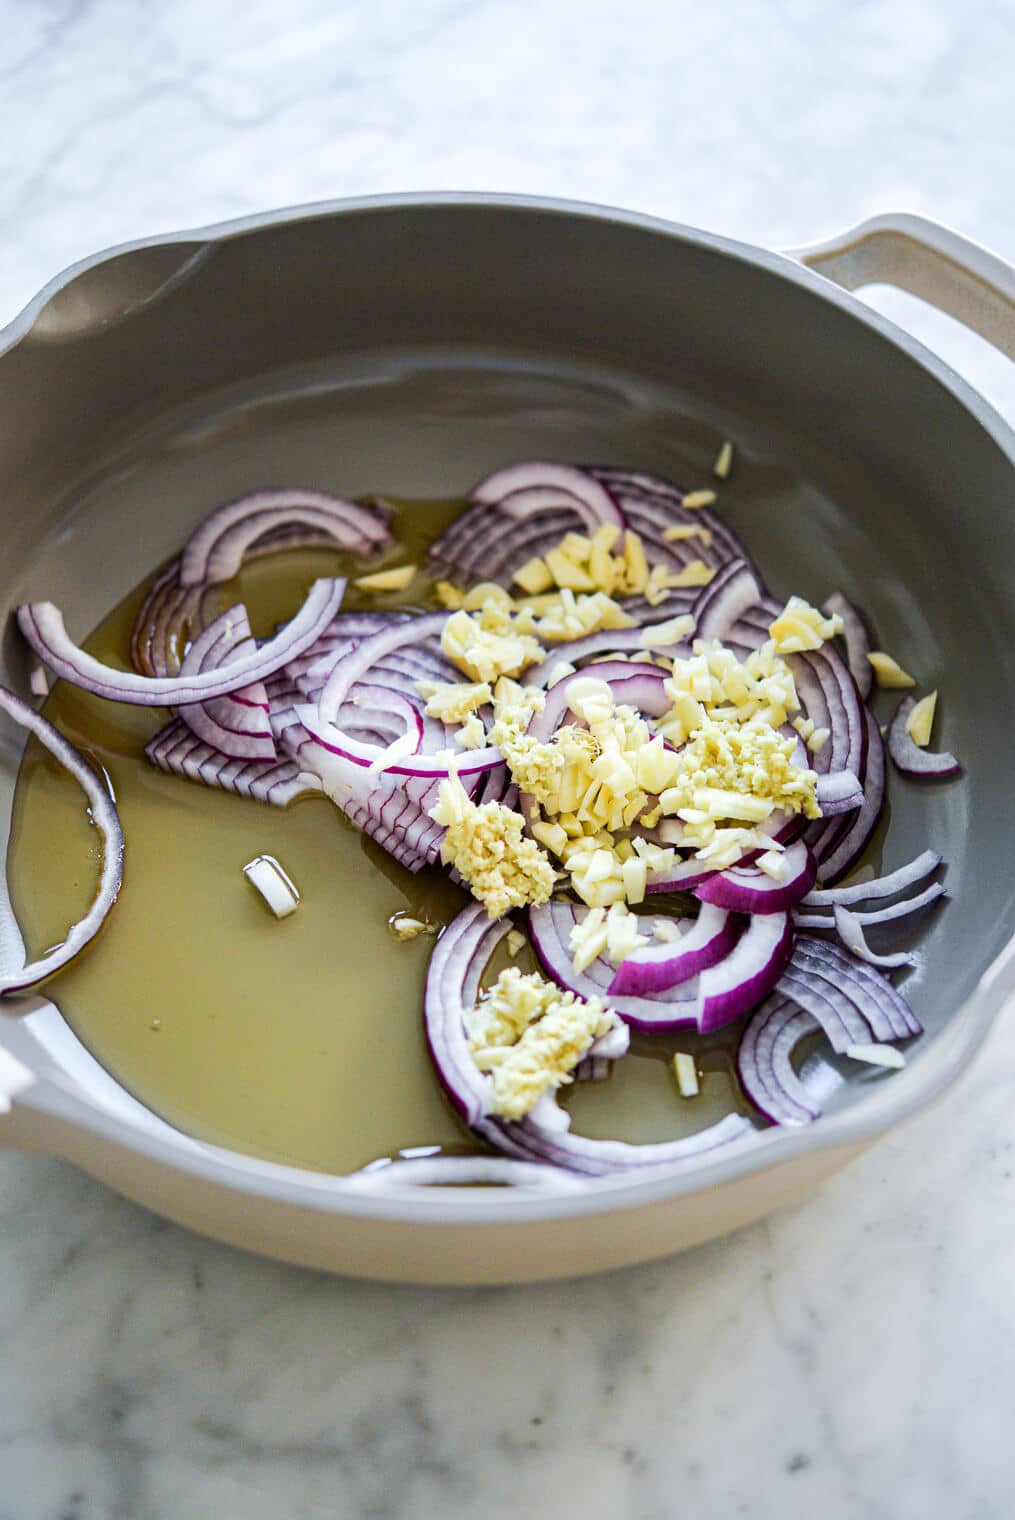 Sauté pan with sliced red onion, minced garlic, and oil